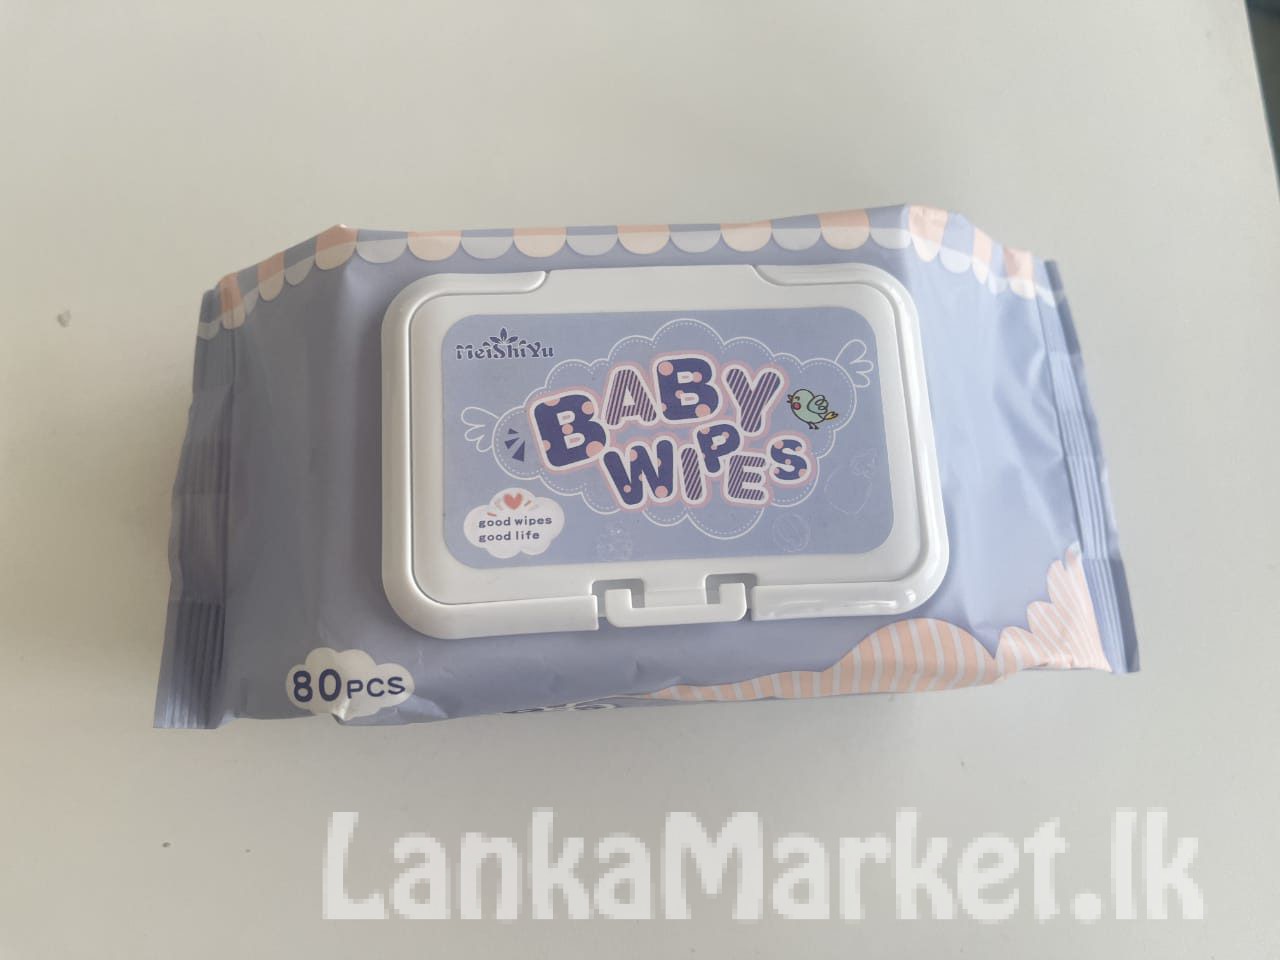 Non alcohol wet wipes